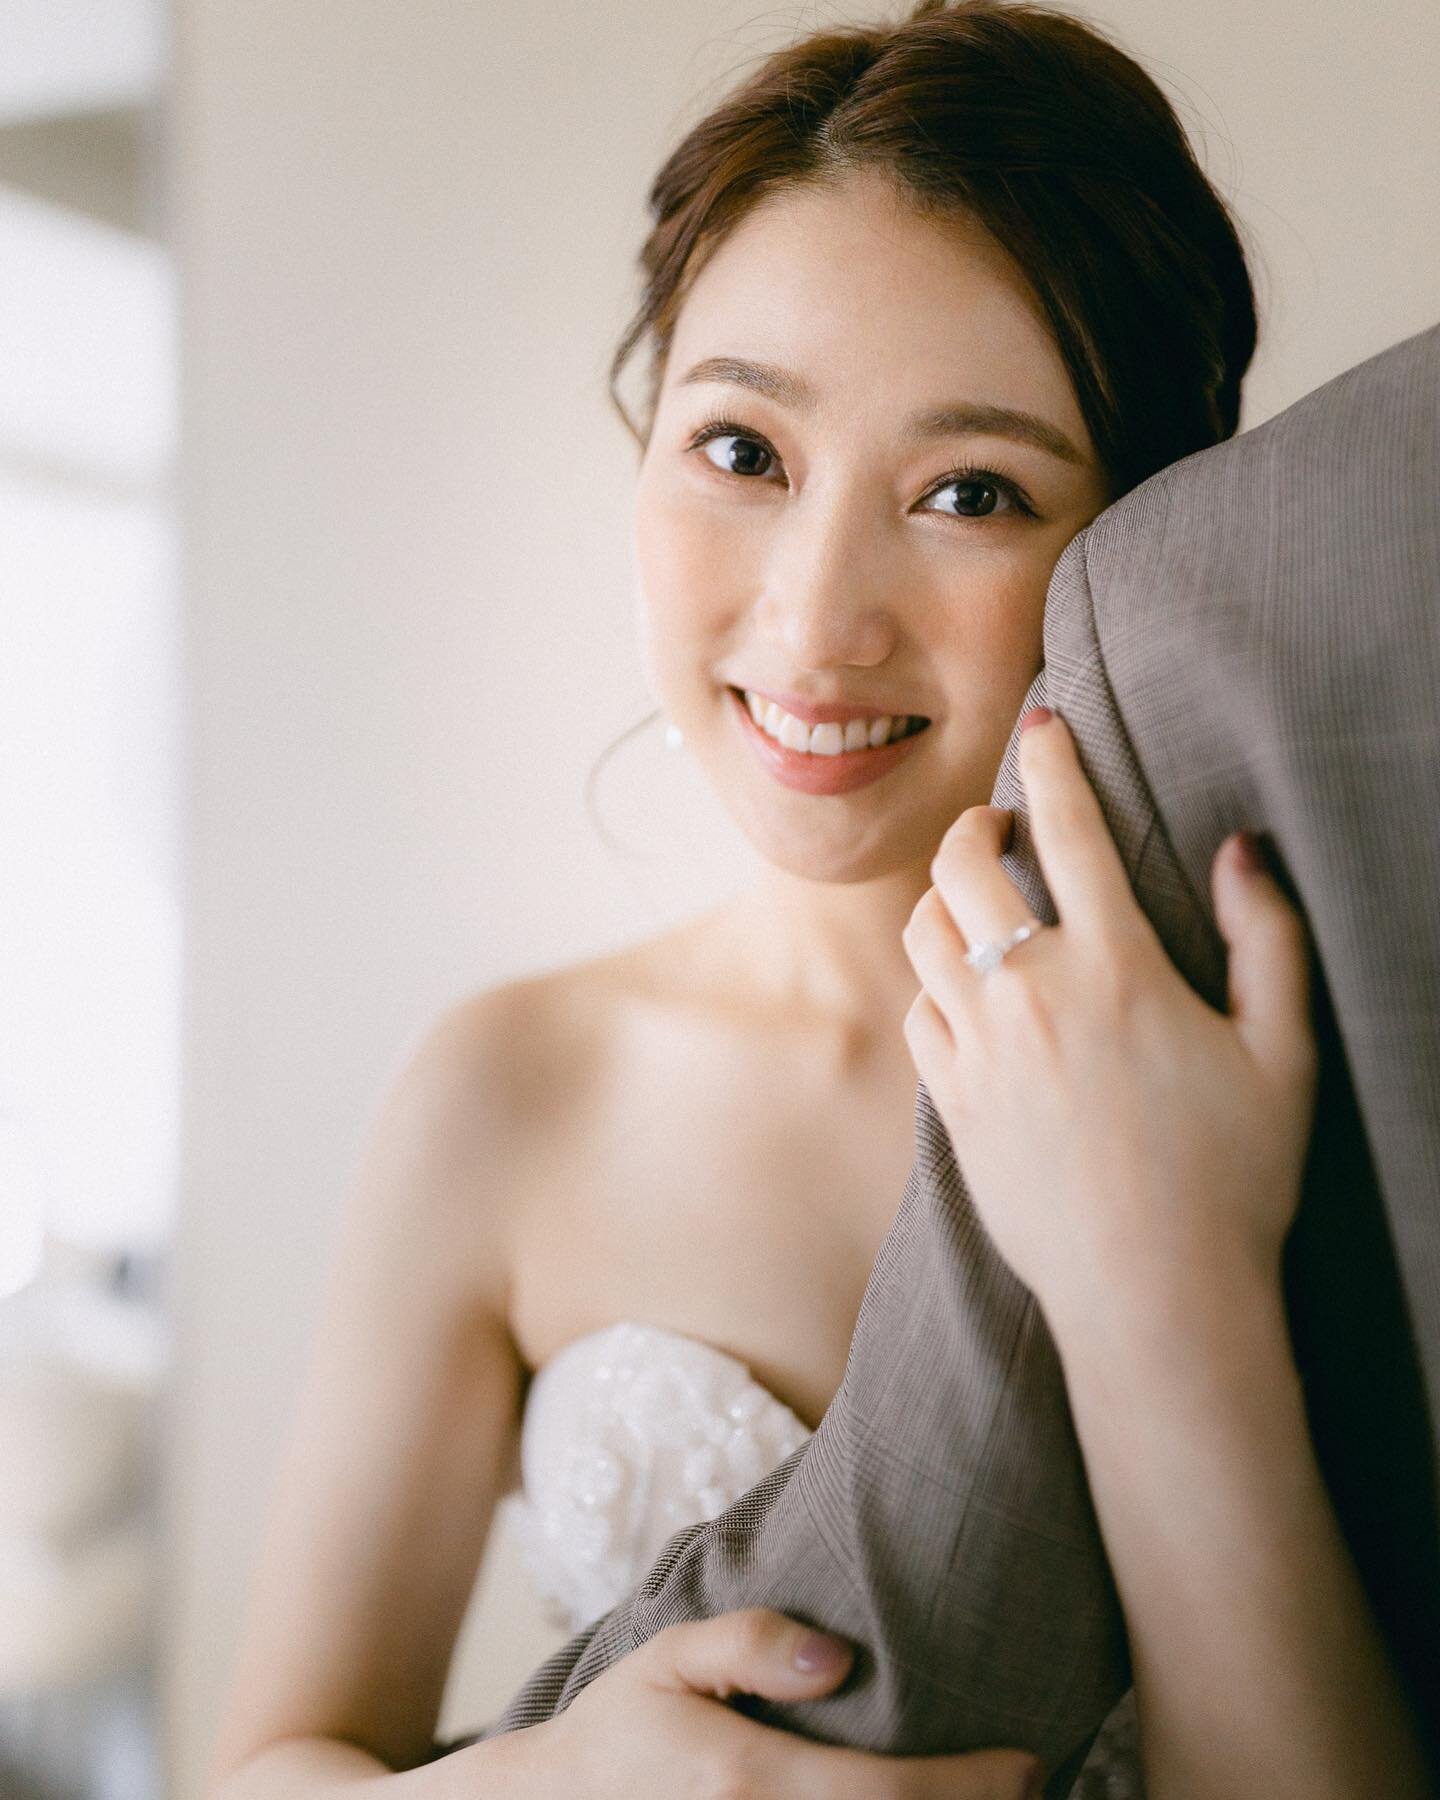 Your smile was the beginning of my love for you. 

#staycationhk 
#preweddinghk 

Couple @queenie.720 @tommy_wong_87 
Photography @blissnblooms 
Hair and Makeup @echo_makeup 
Bridal earrings and hair accessories @downtheaisleatelier 

#blissnblooms
#